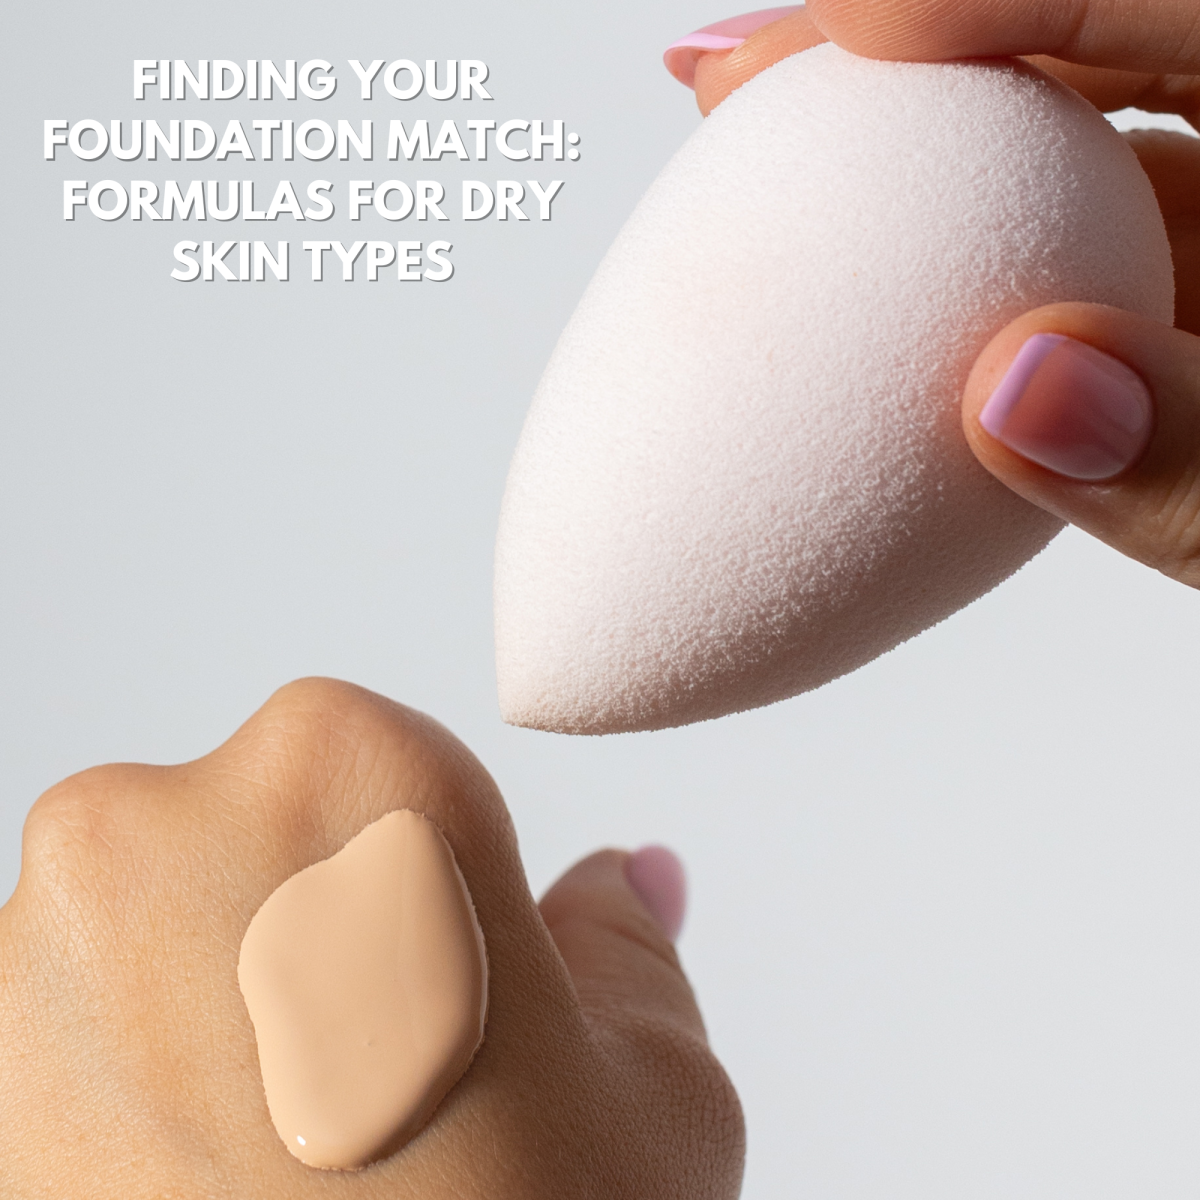 Finding Your Foundation Match: Formulas for Dry Skin Types